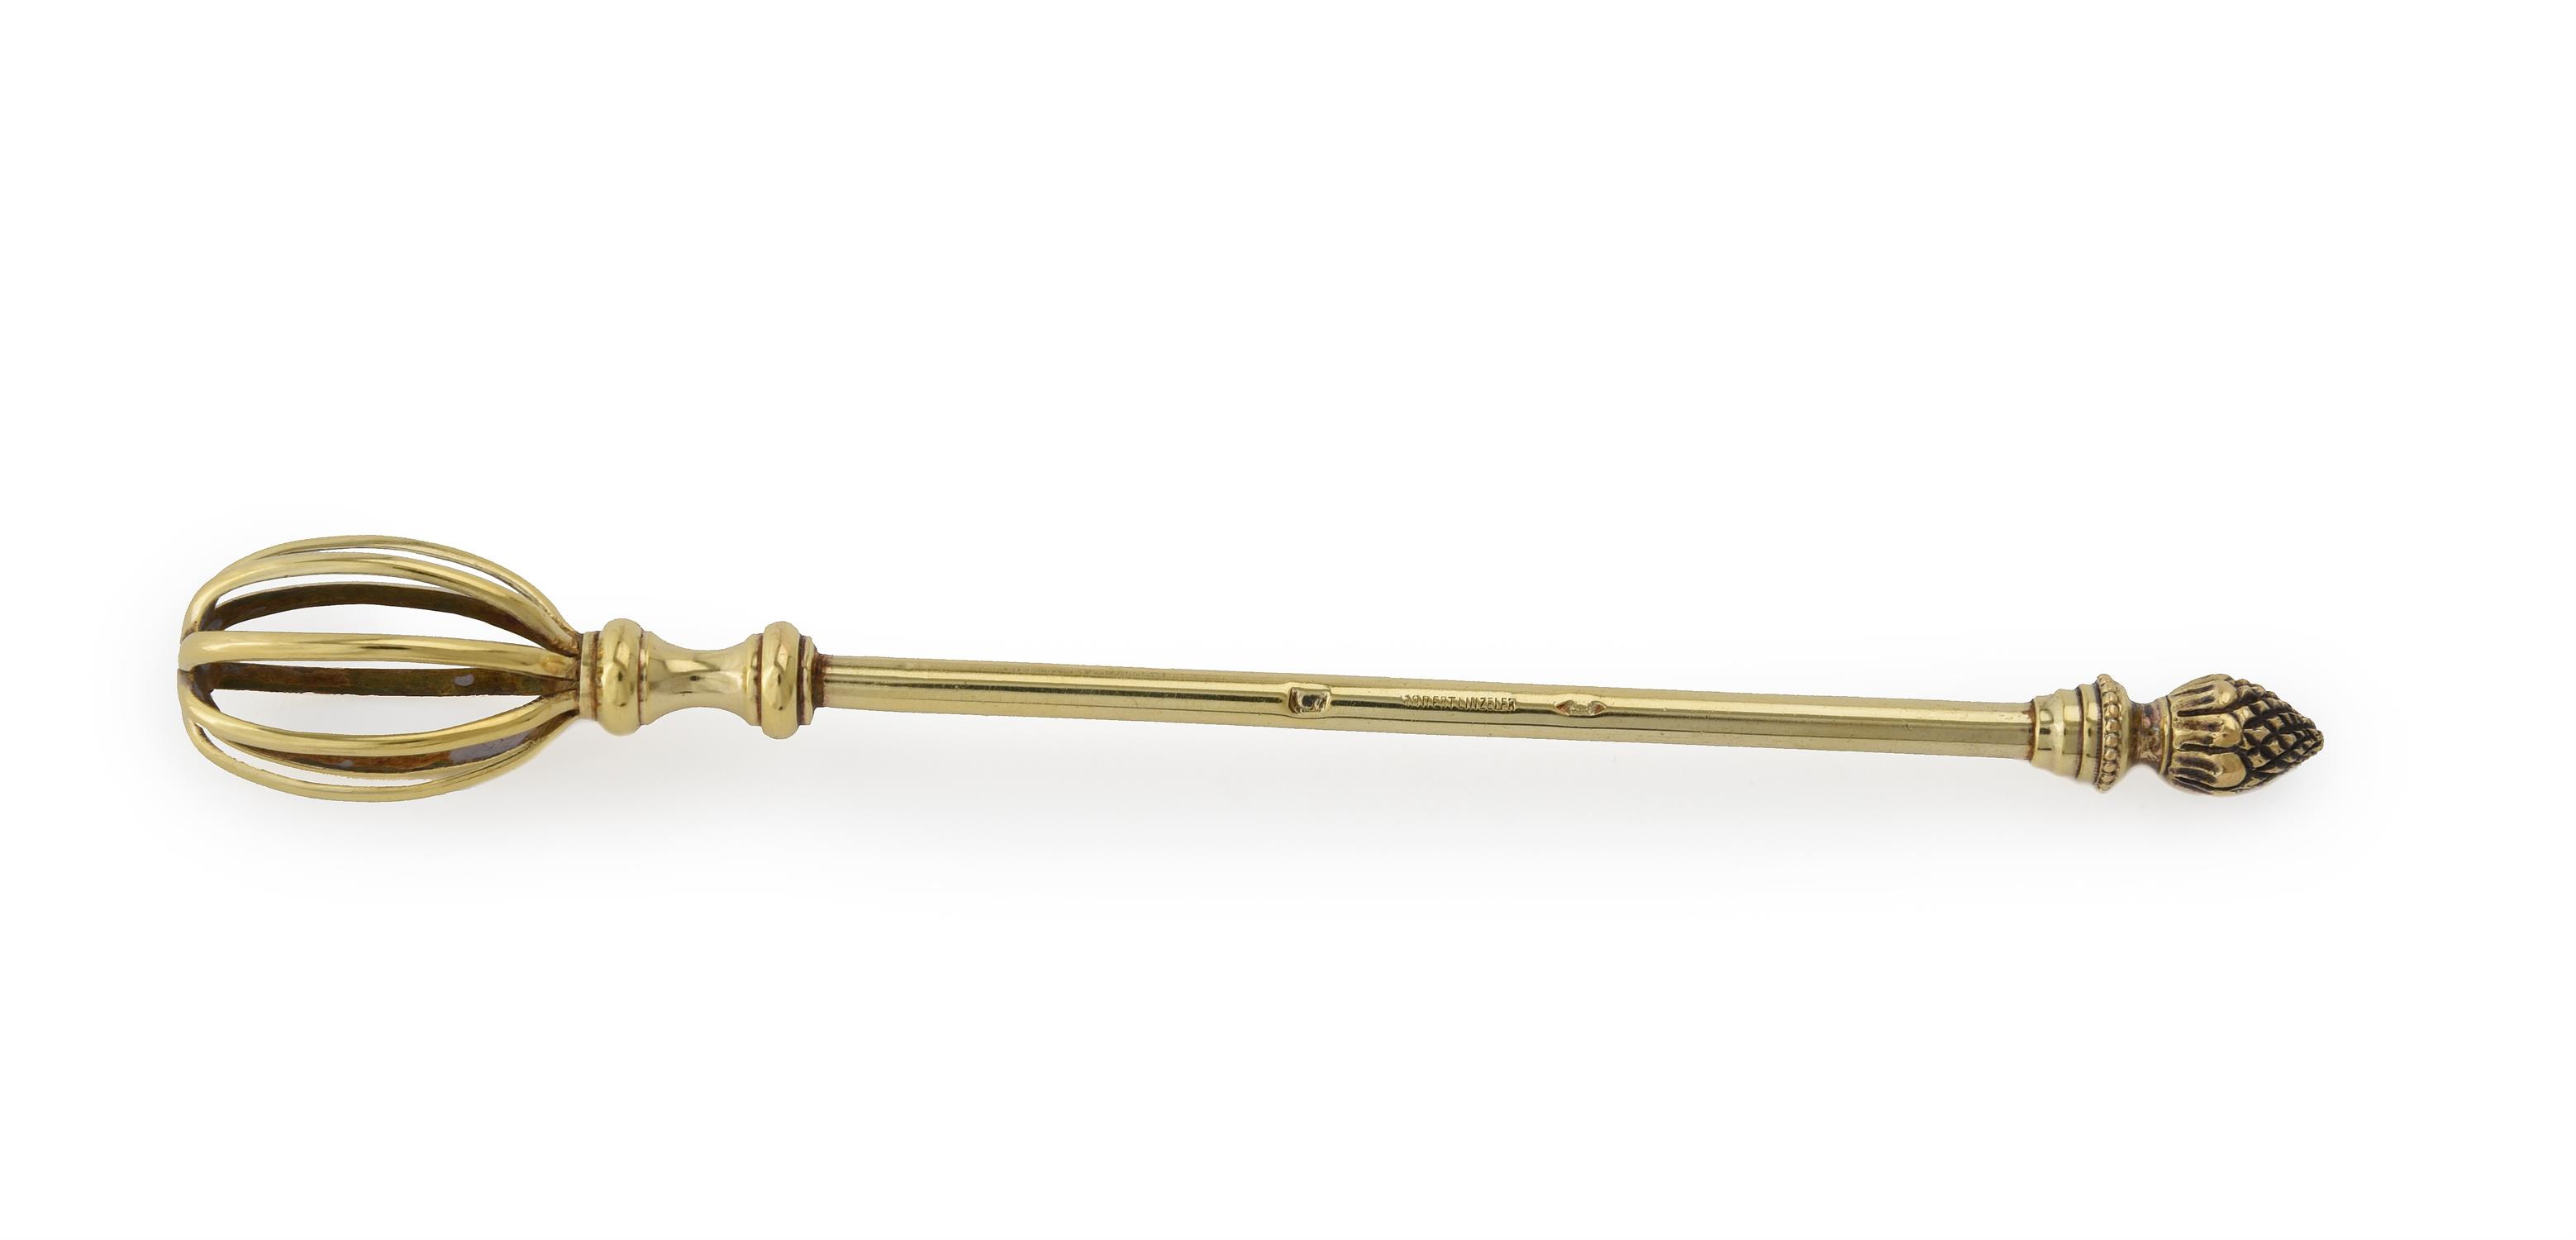 A set of twelve French silver gilt cocktail stirrers by Robert Linzeler & Cie. - Image 3 of 3